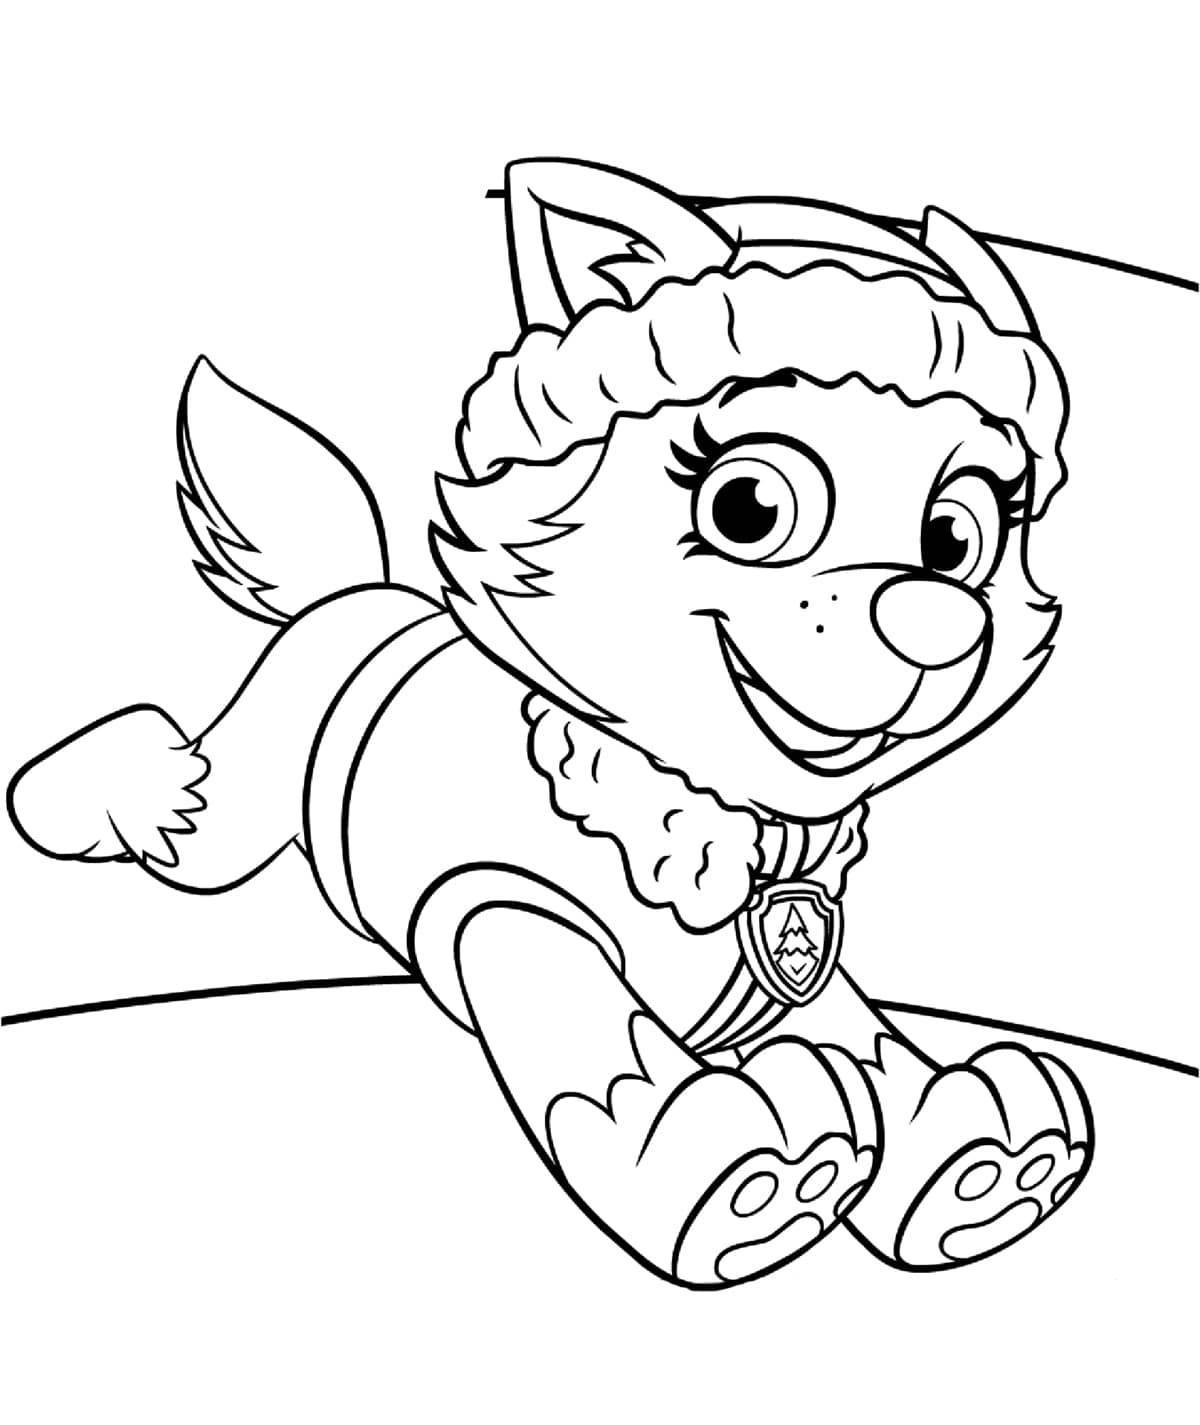 Puppy Patrol coloring page for girls